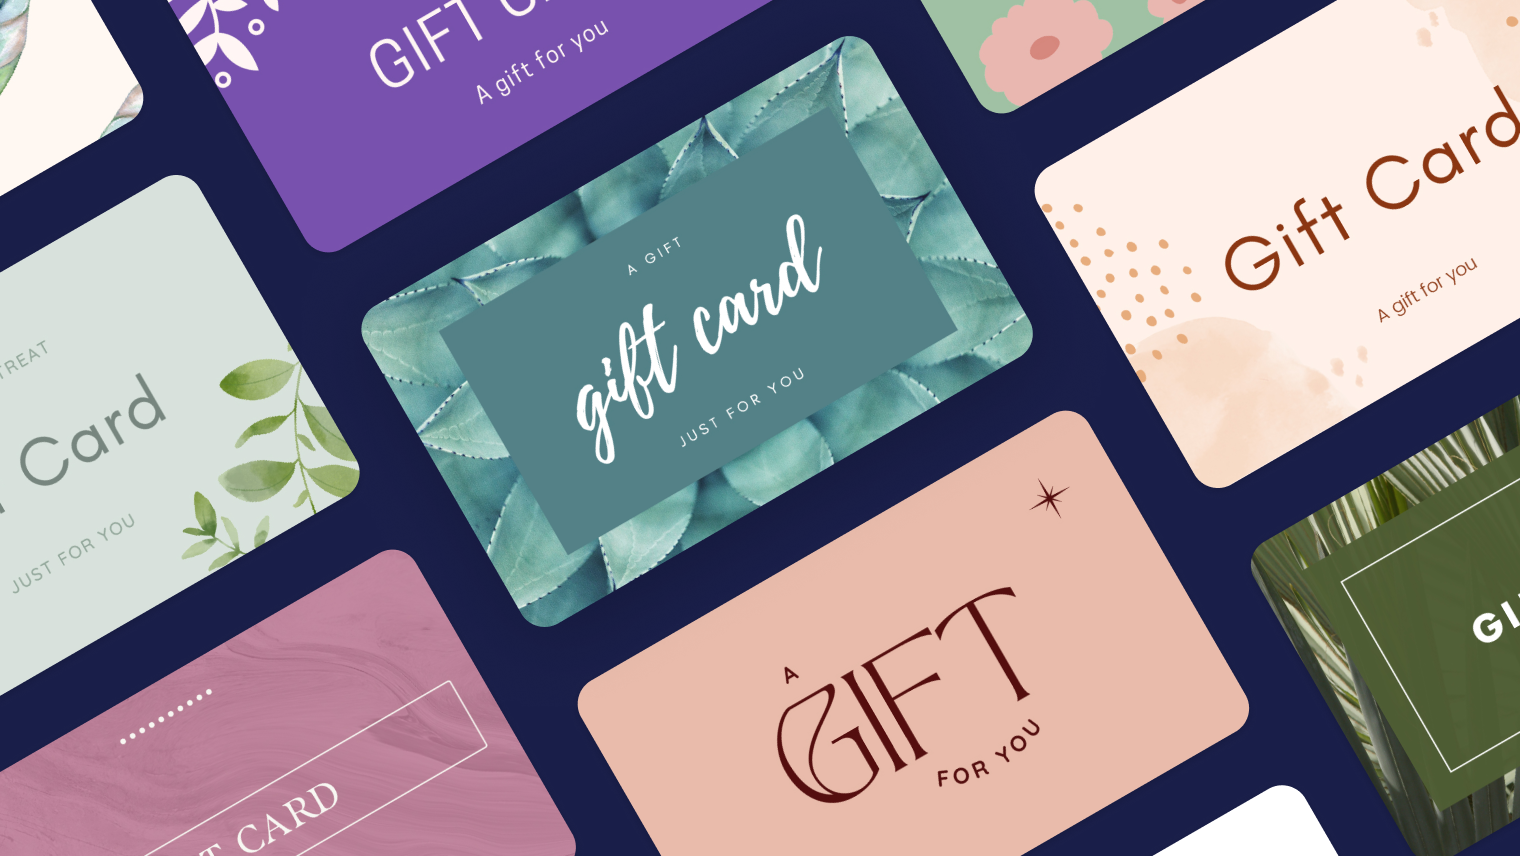 How to sell salon gift cards: 9 promotion ideas and examples 